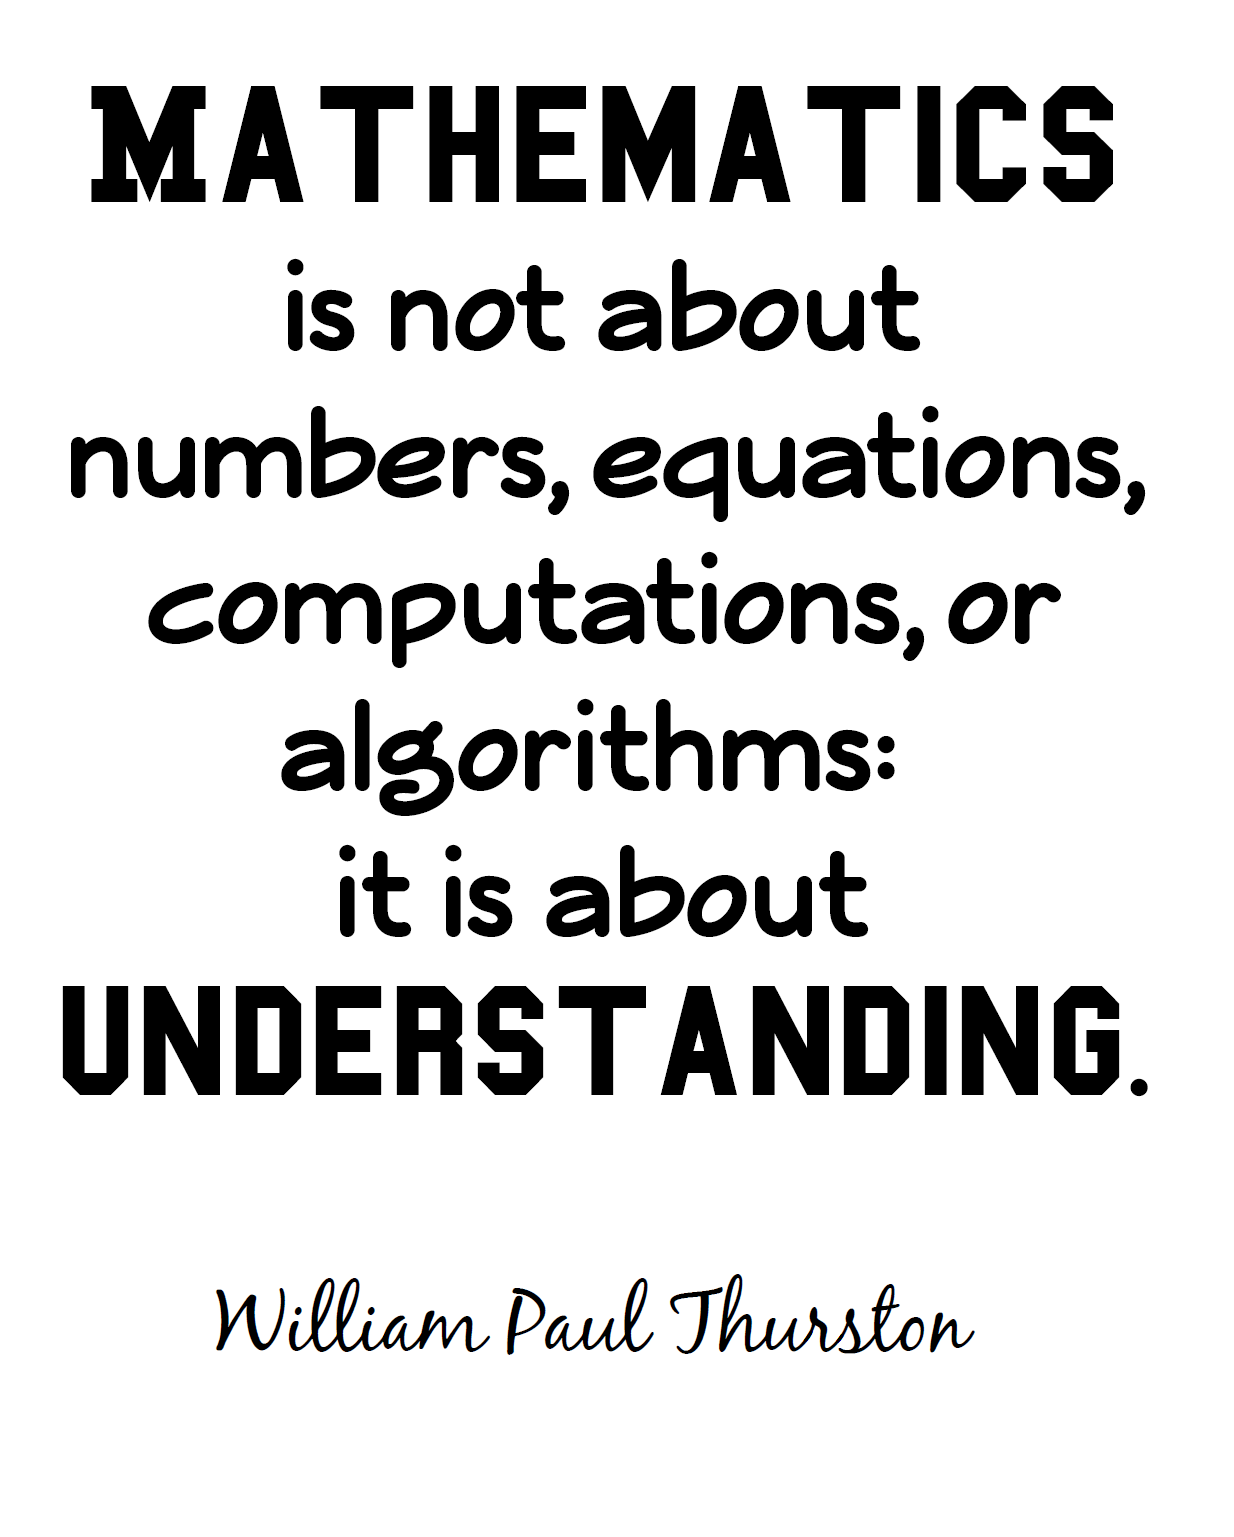 MATHEMATICS is not about numbers, equations, computations, or algorithms it is about UNDERSTANDING. W.P. Thurston